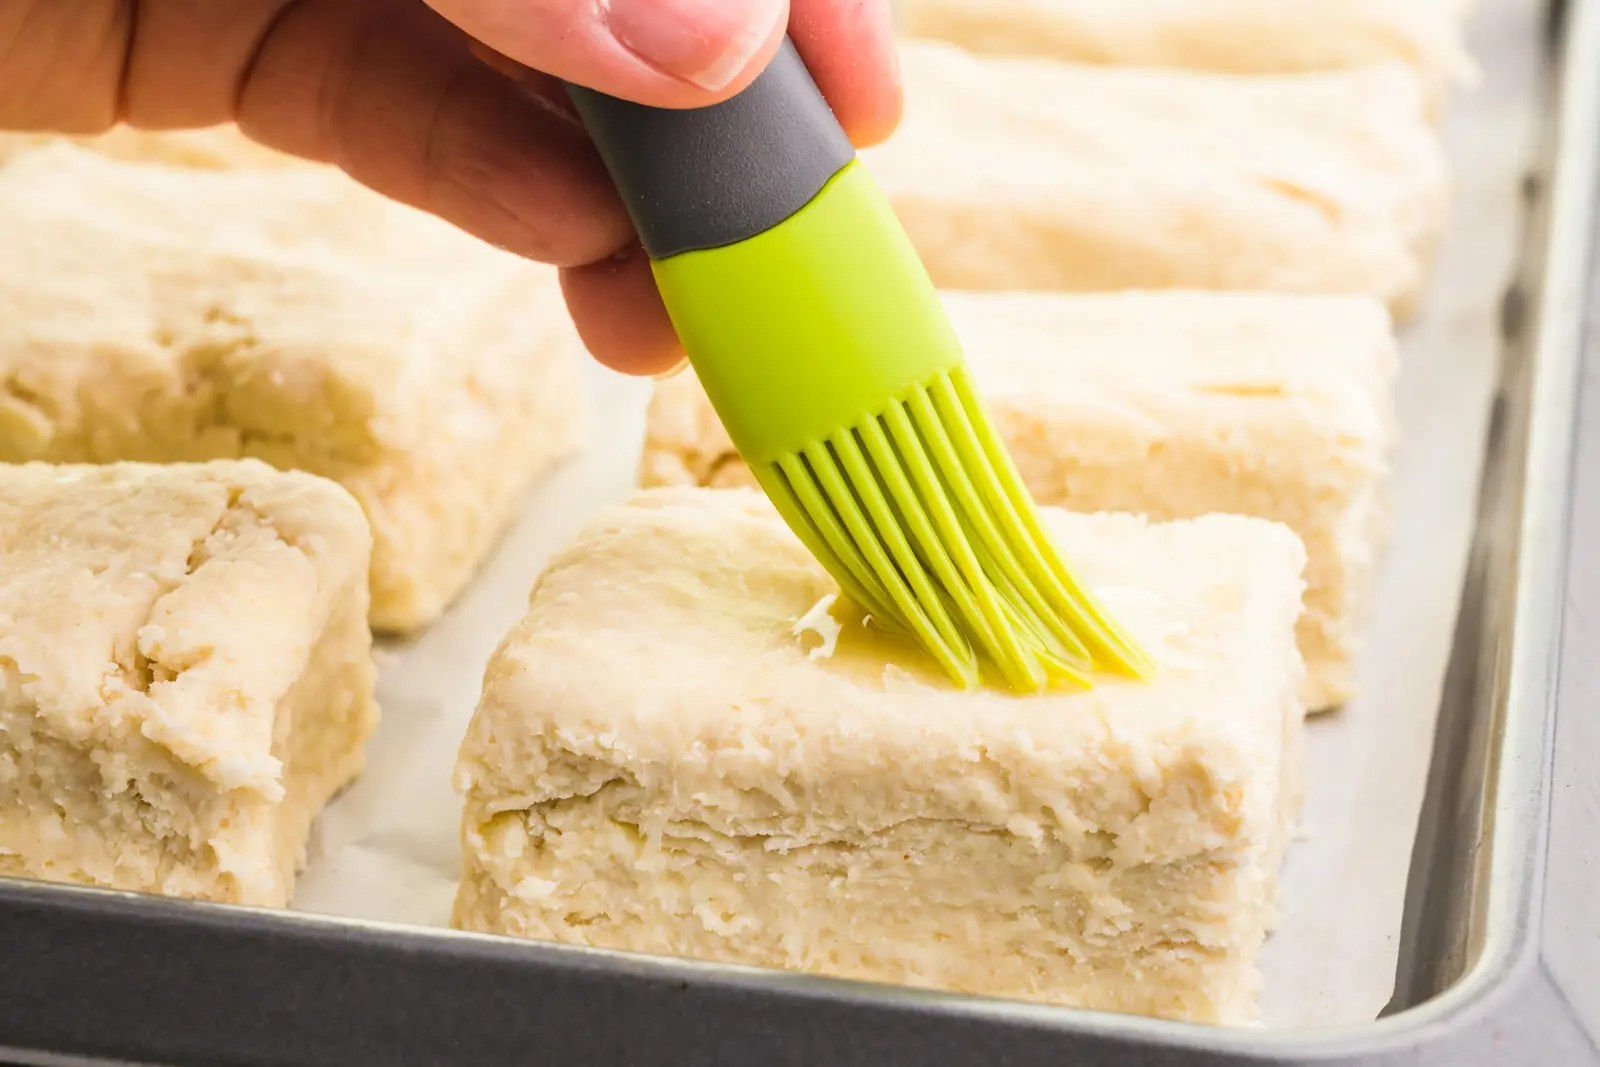 A hand holds a pastry brush, brushing liquid over unbaked biscuits.